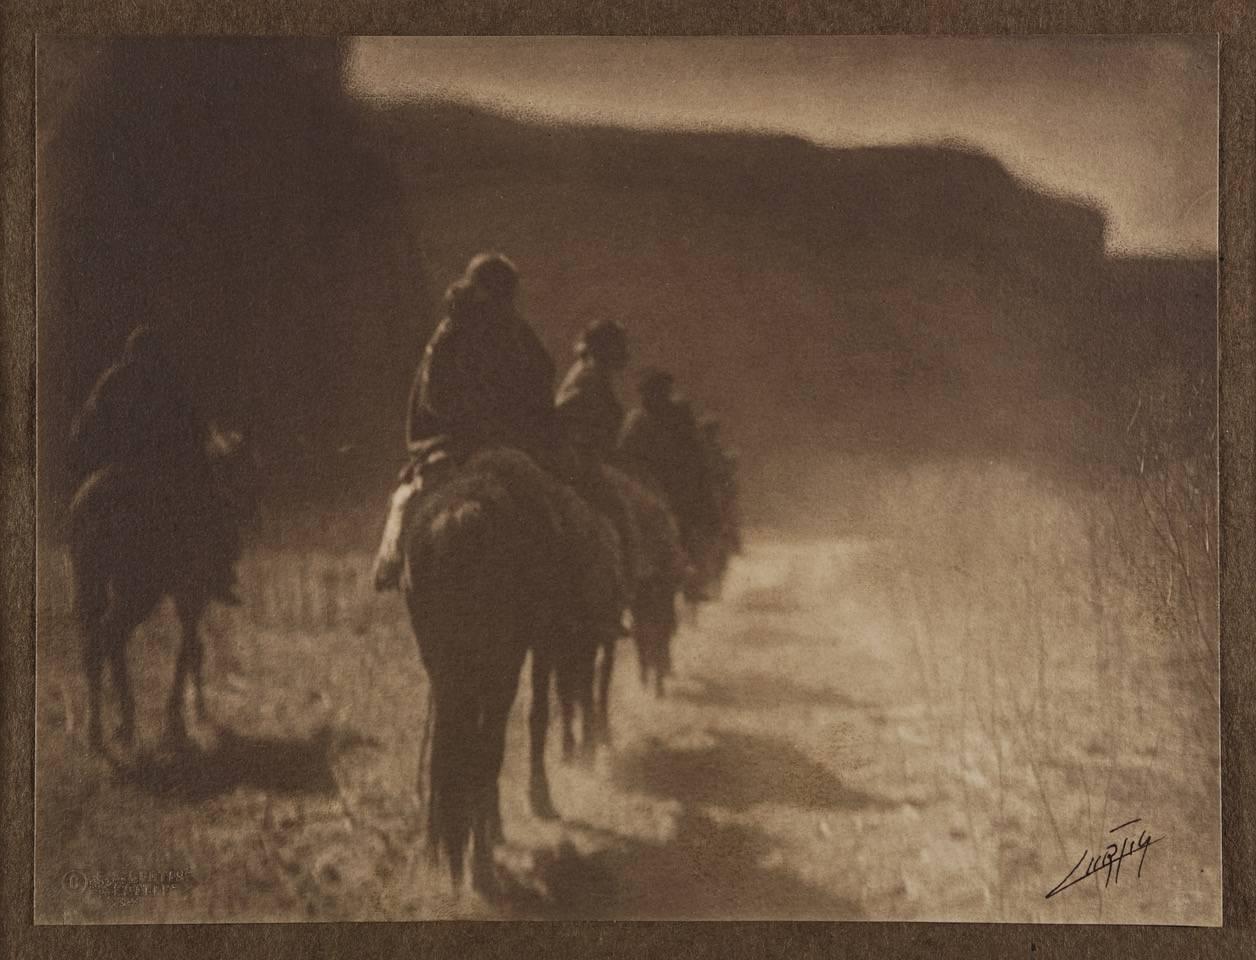 The Vanishing Race - Photograph by Edward Curtis